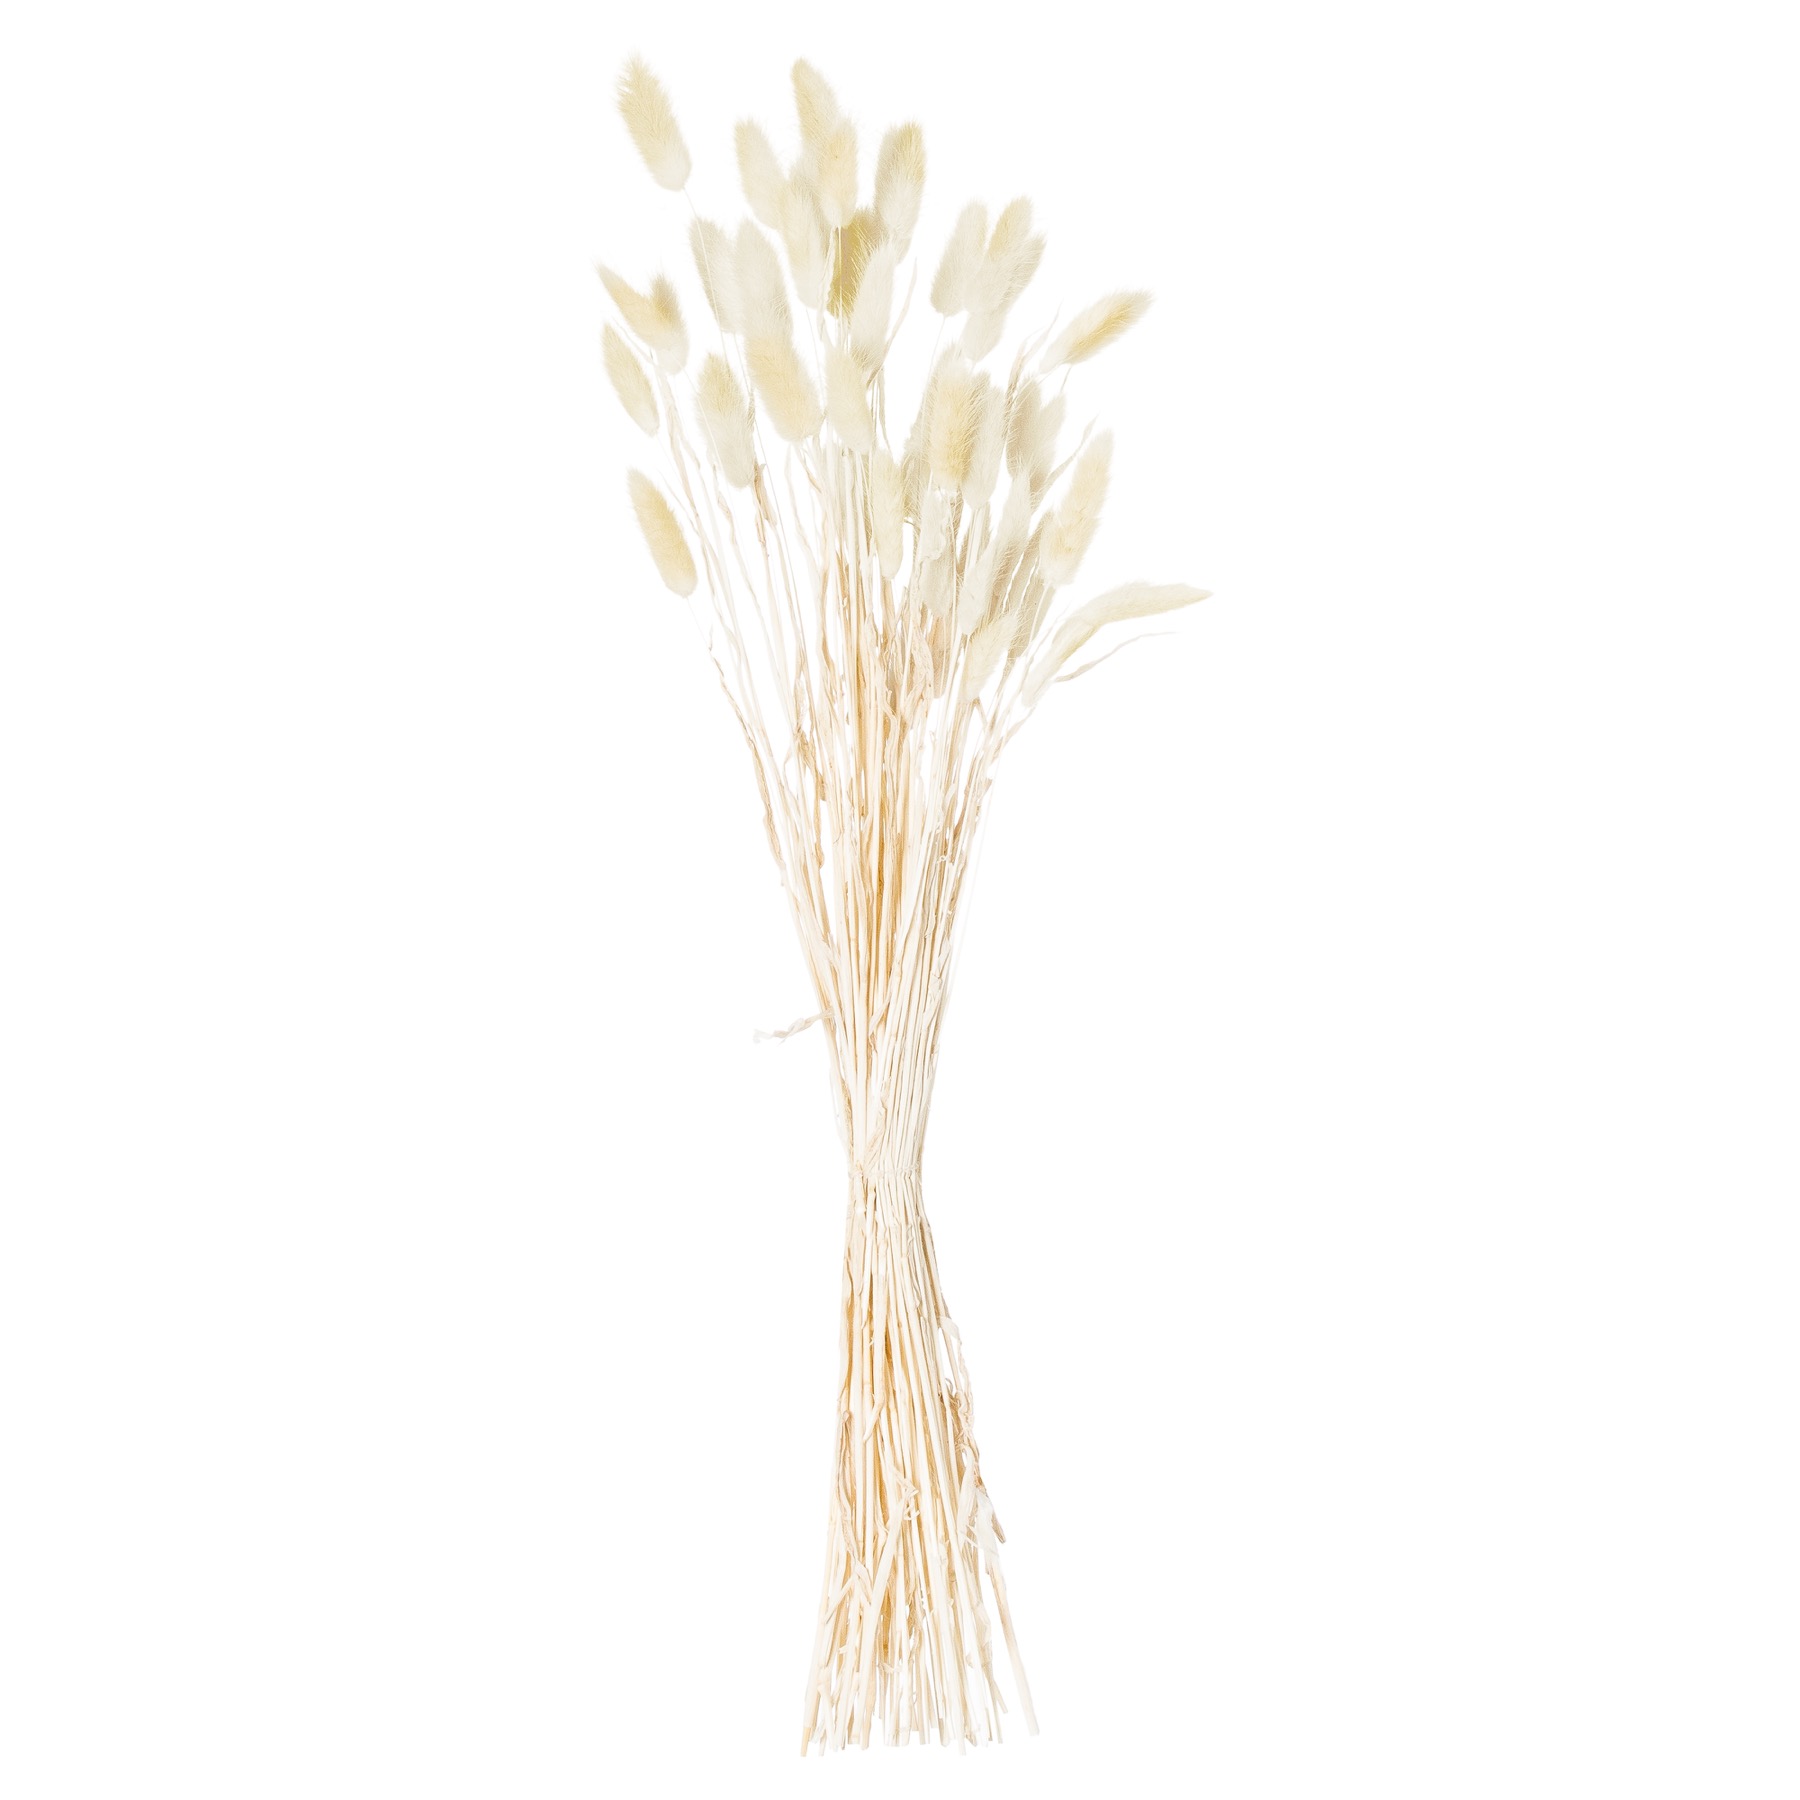 Dried Natural Bunny Tail Bunch Of 40 - Image 2